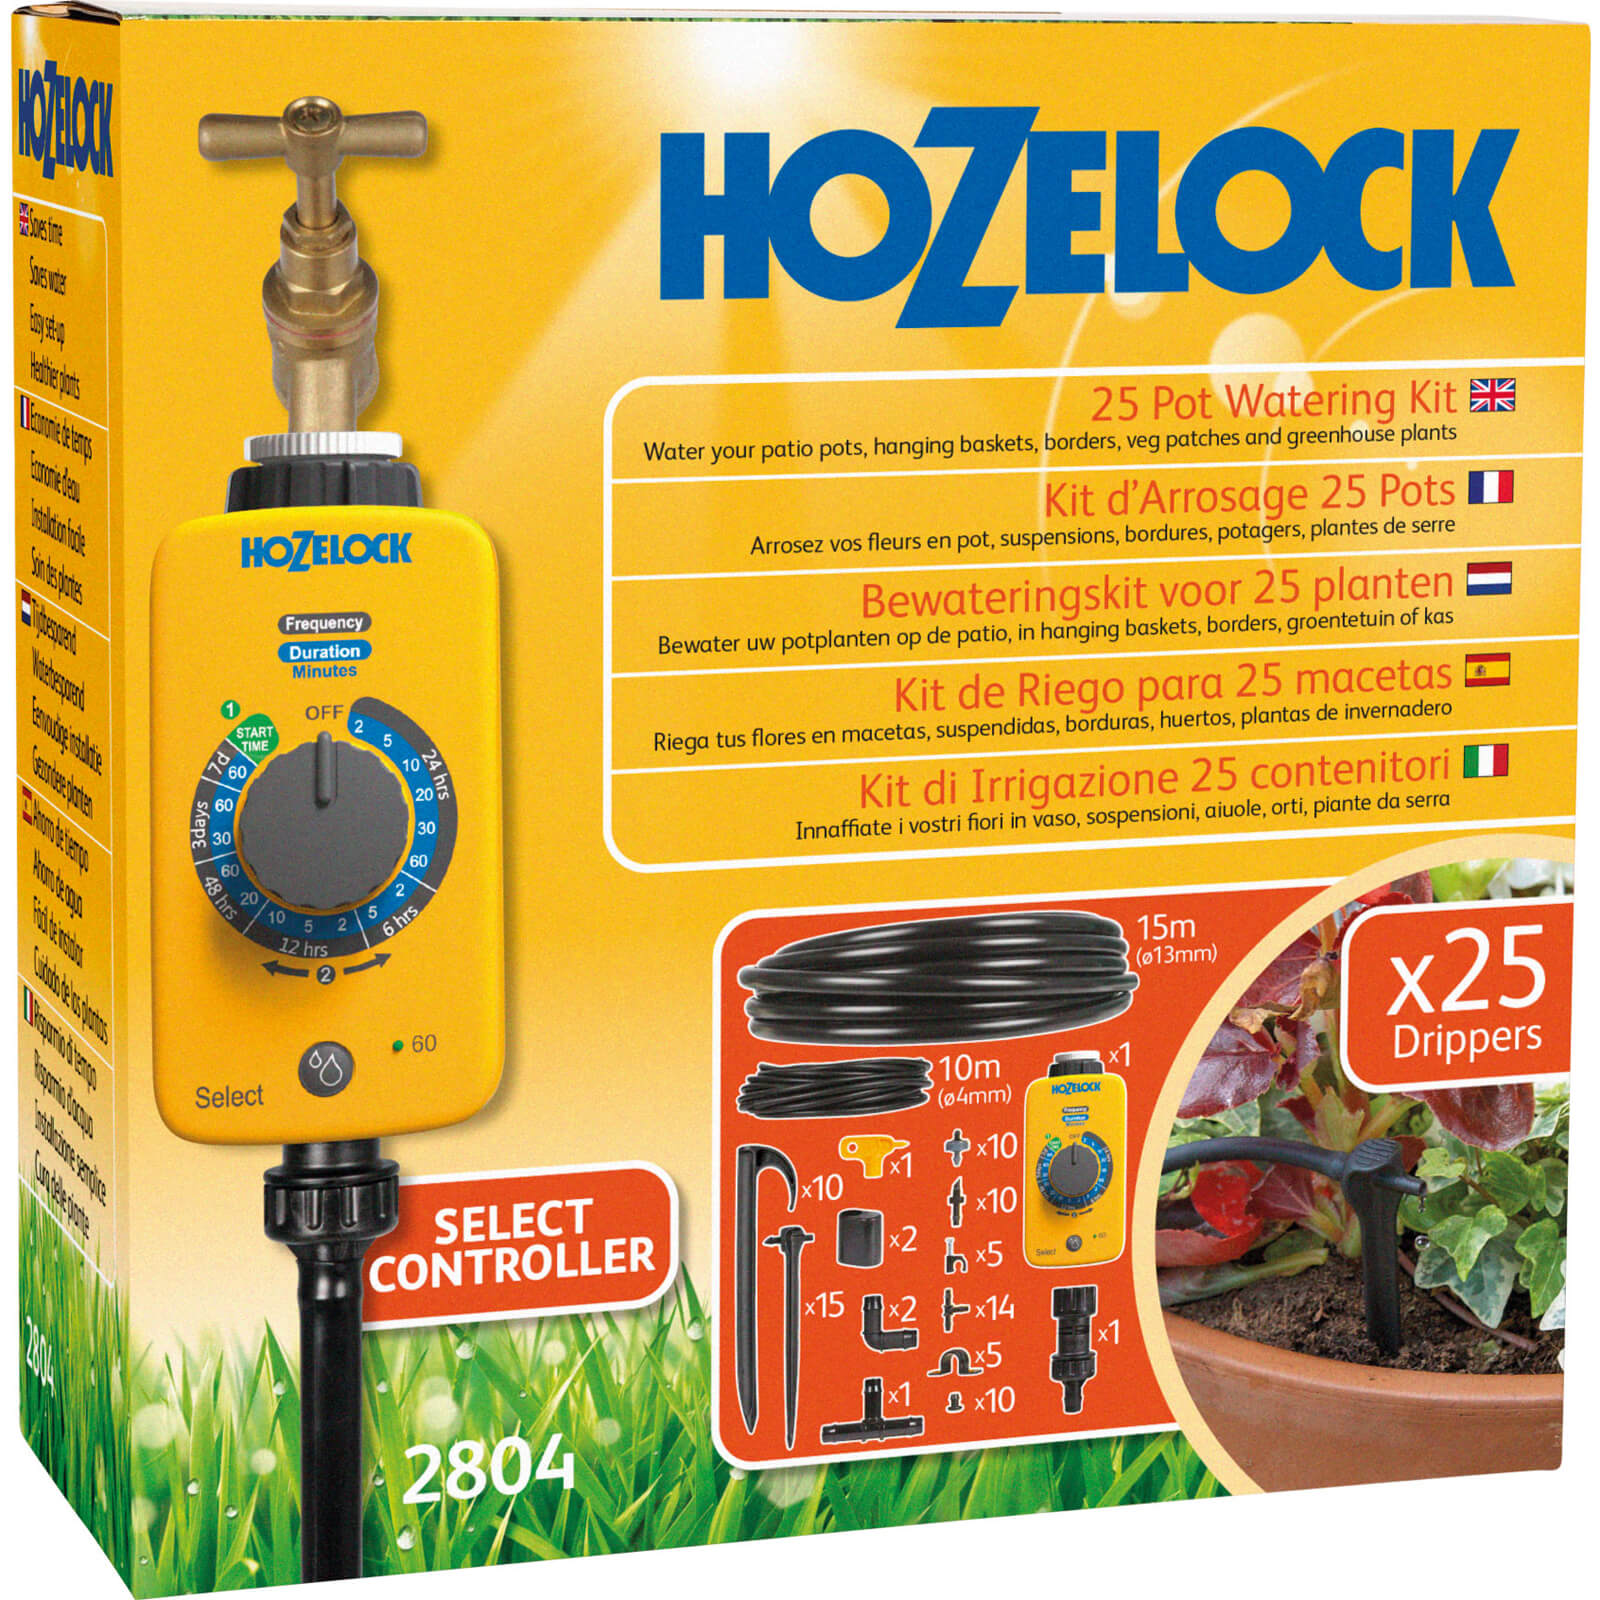 Photos - Other for Irrigation Hozelock MICRO 25 Pot Garden Watering System and Sensor Timer 2804 